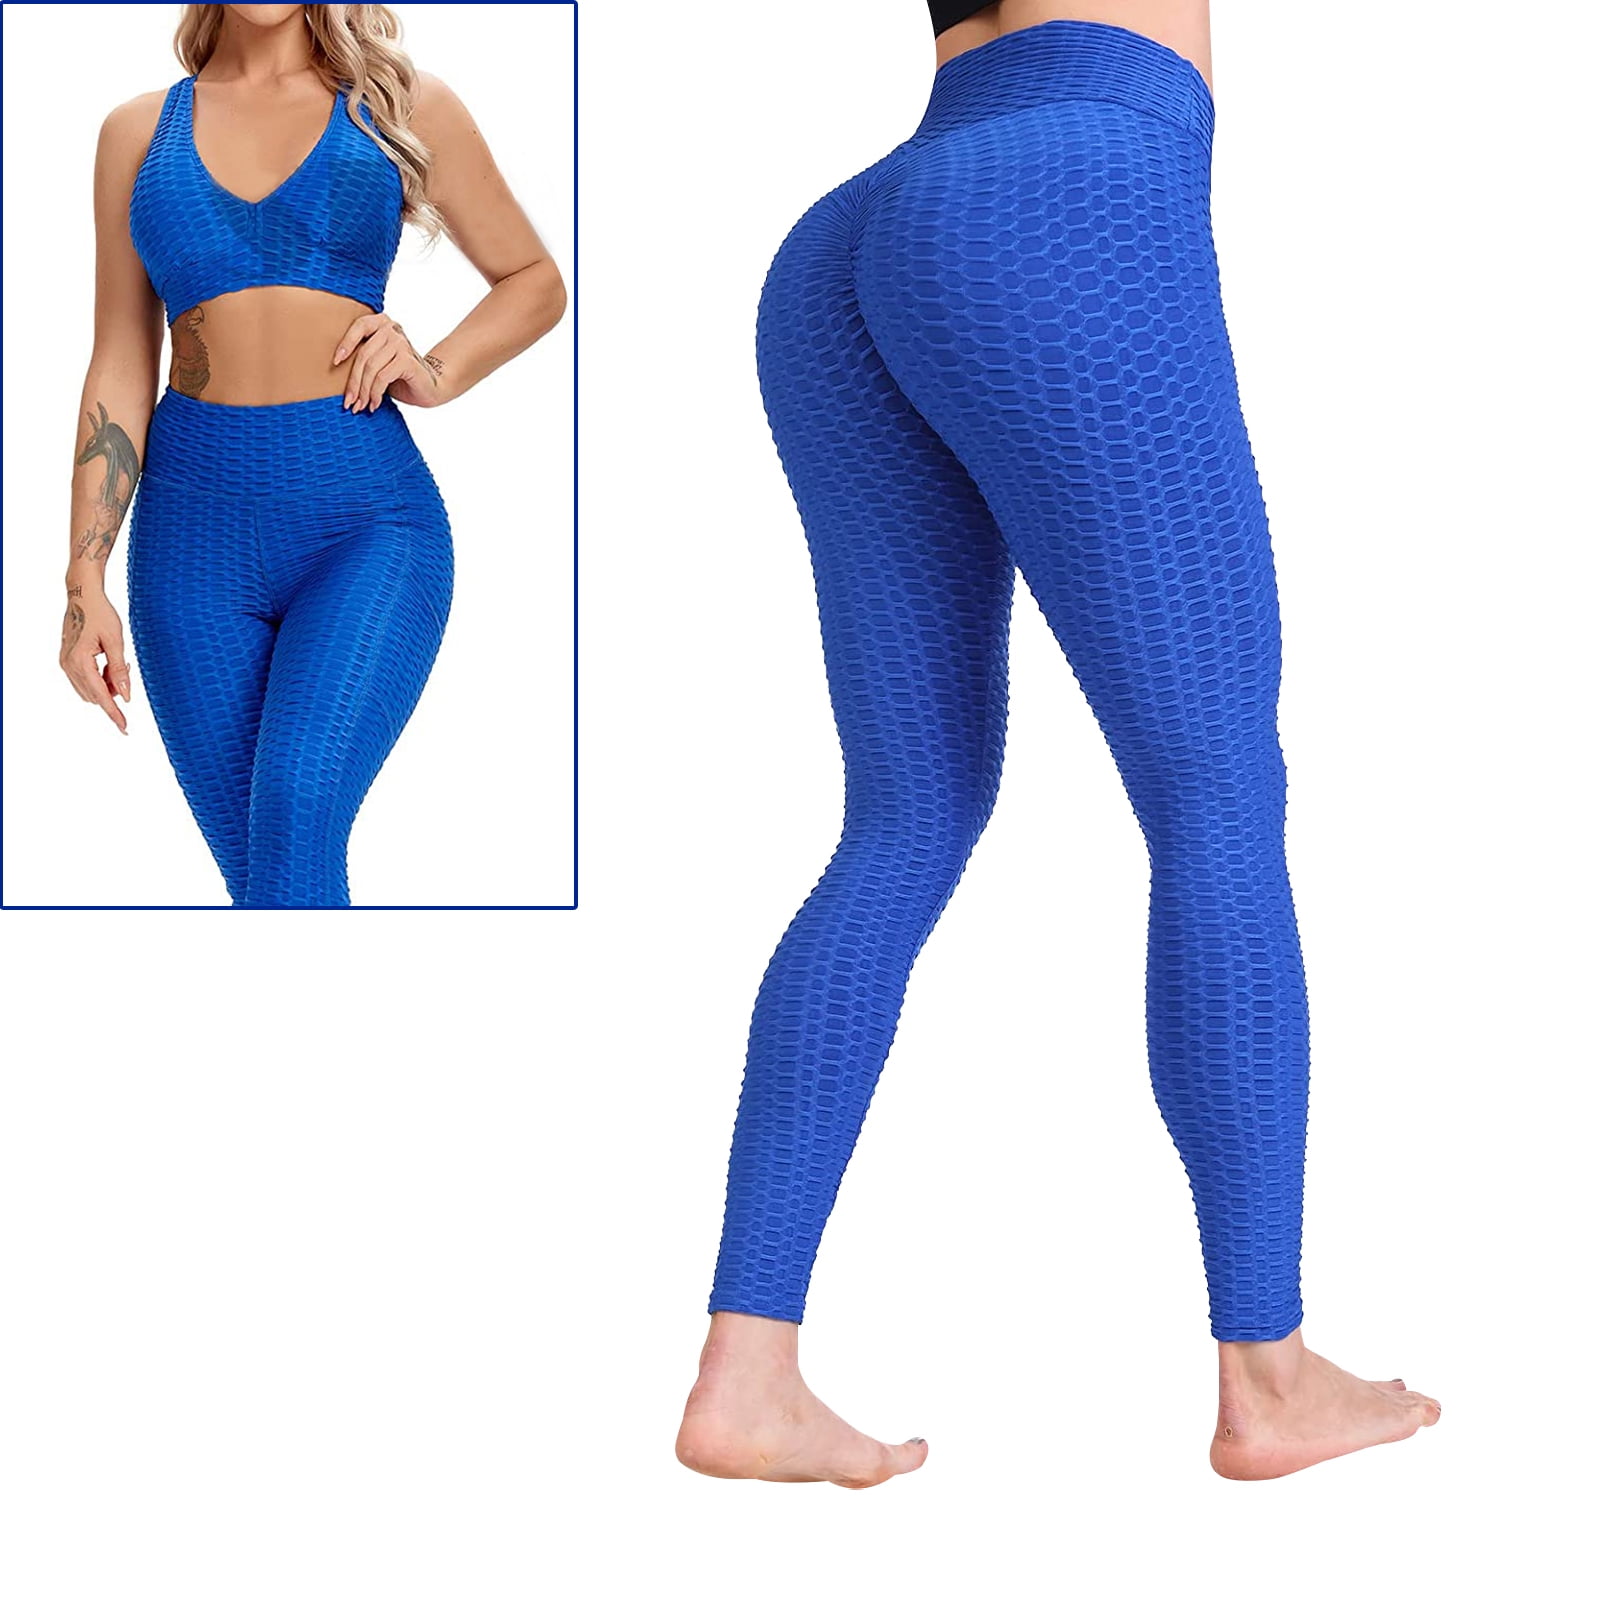  Msicyness Tiktok Leggings 3 Pack Women's High Waist Yoga Pants  Butt Lift Tummy Control Leggings Textured Scrunch Booty Tights : Clothing,  Shoes & Jewelry